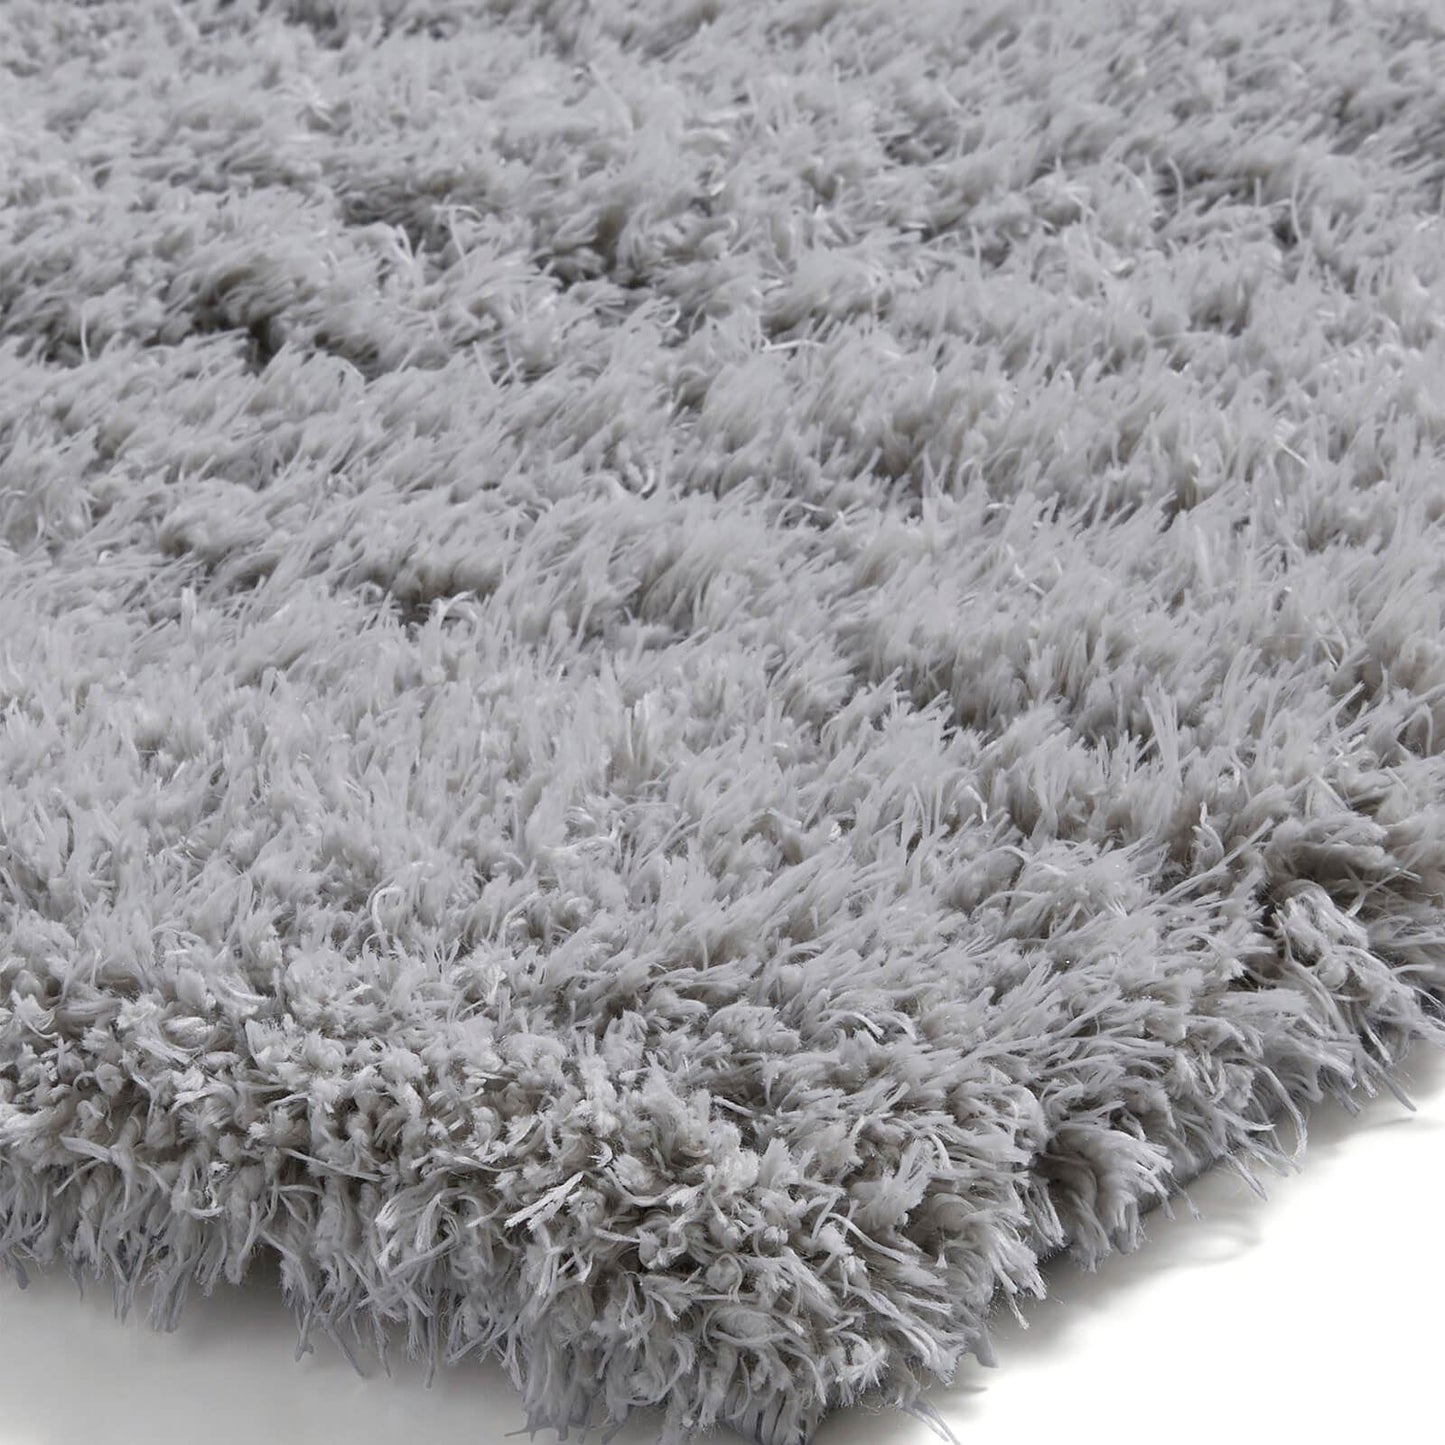 Modern Repreve Recycled Grey Soft Lounge Shaggy 160 X 230Cm Rug